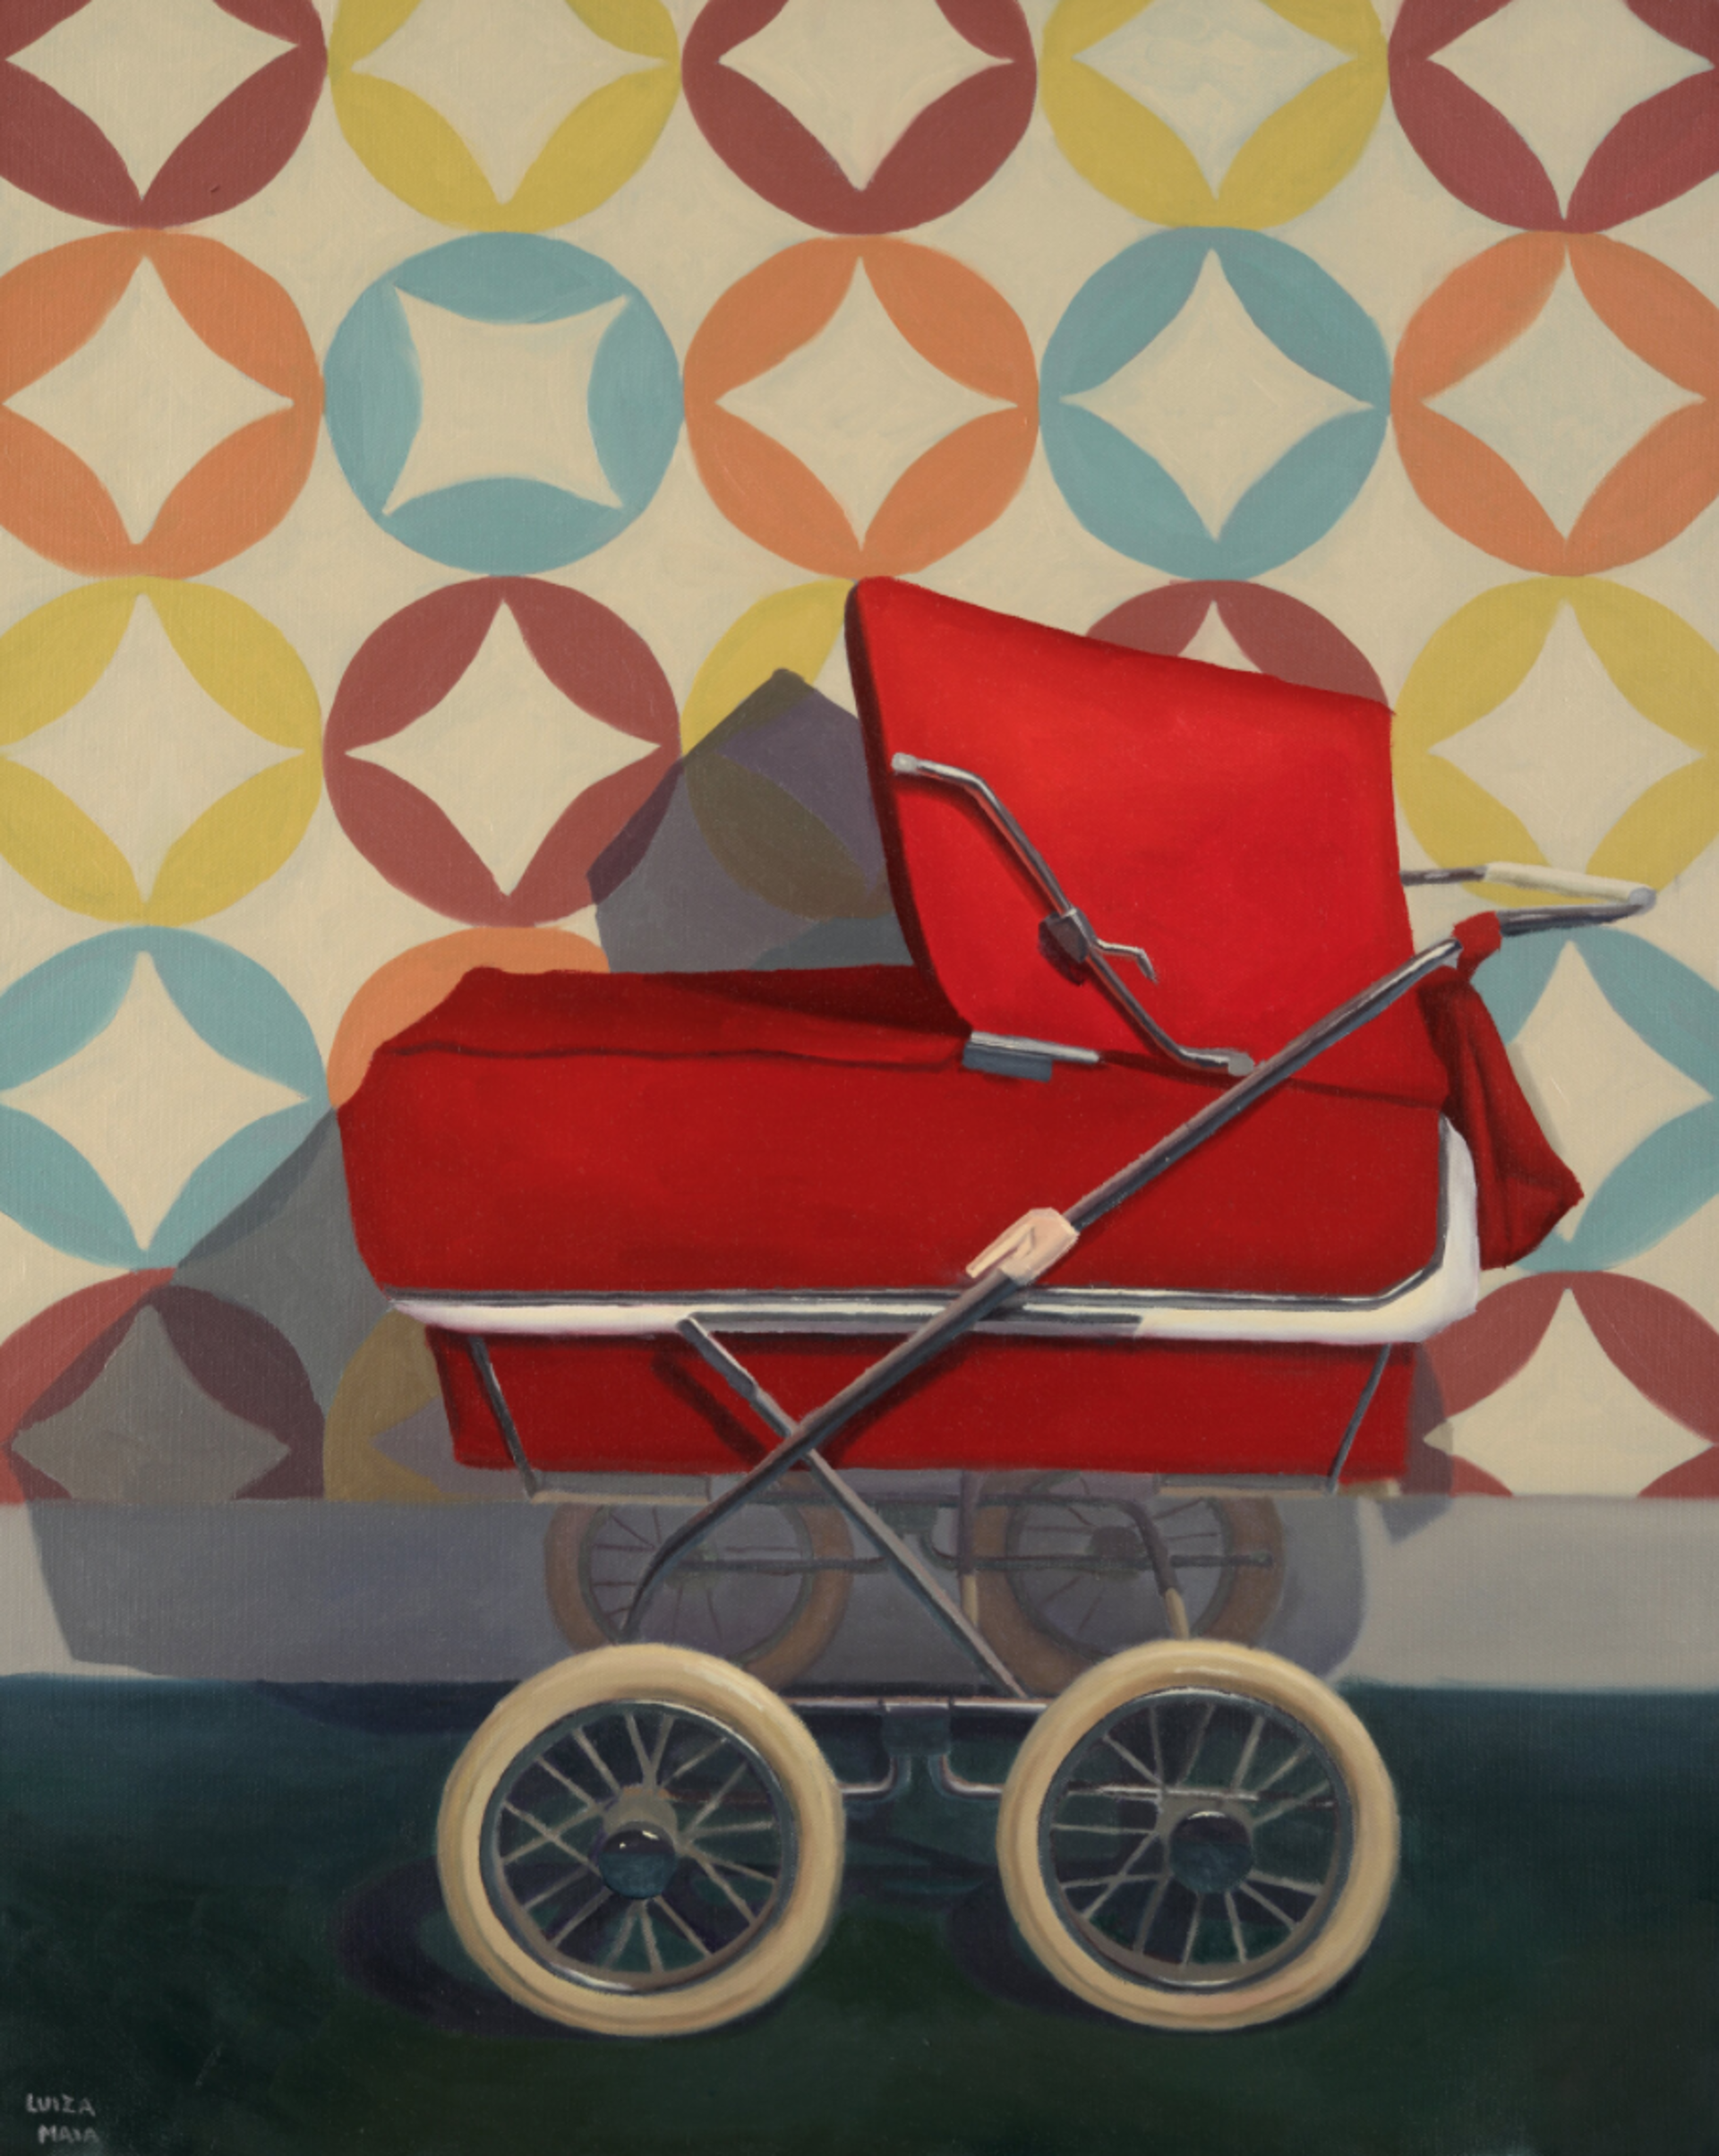 Stroller by Luiza Maia